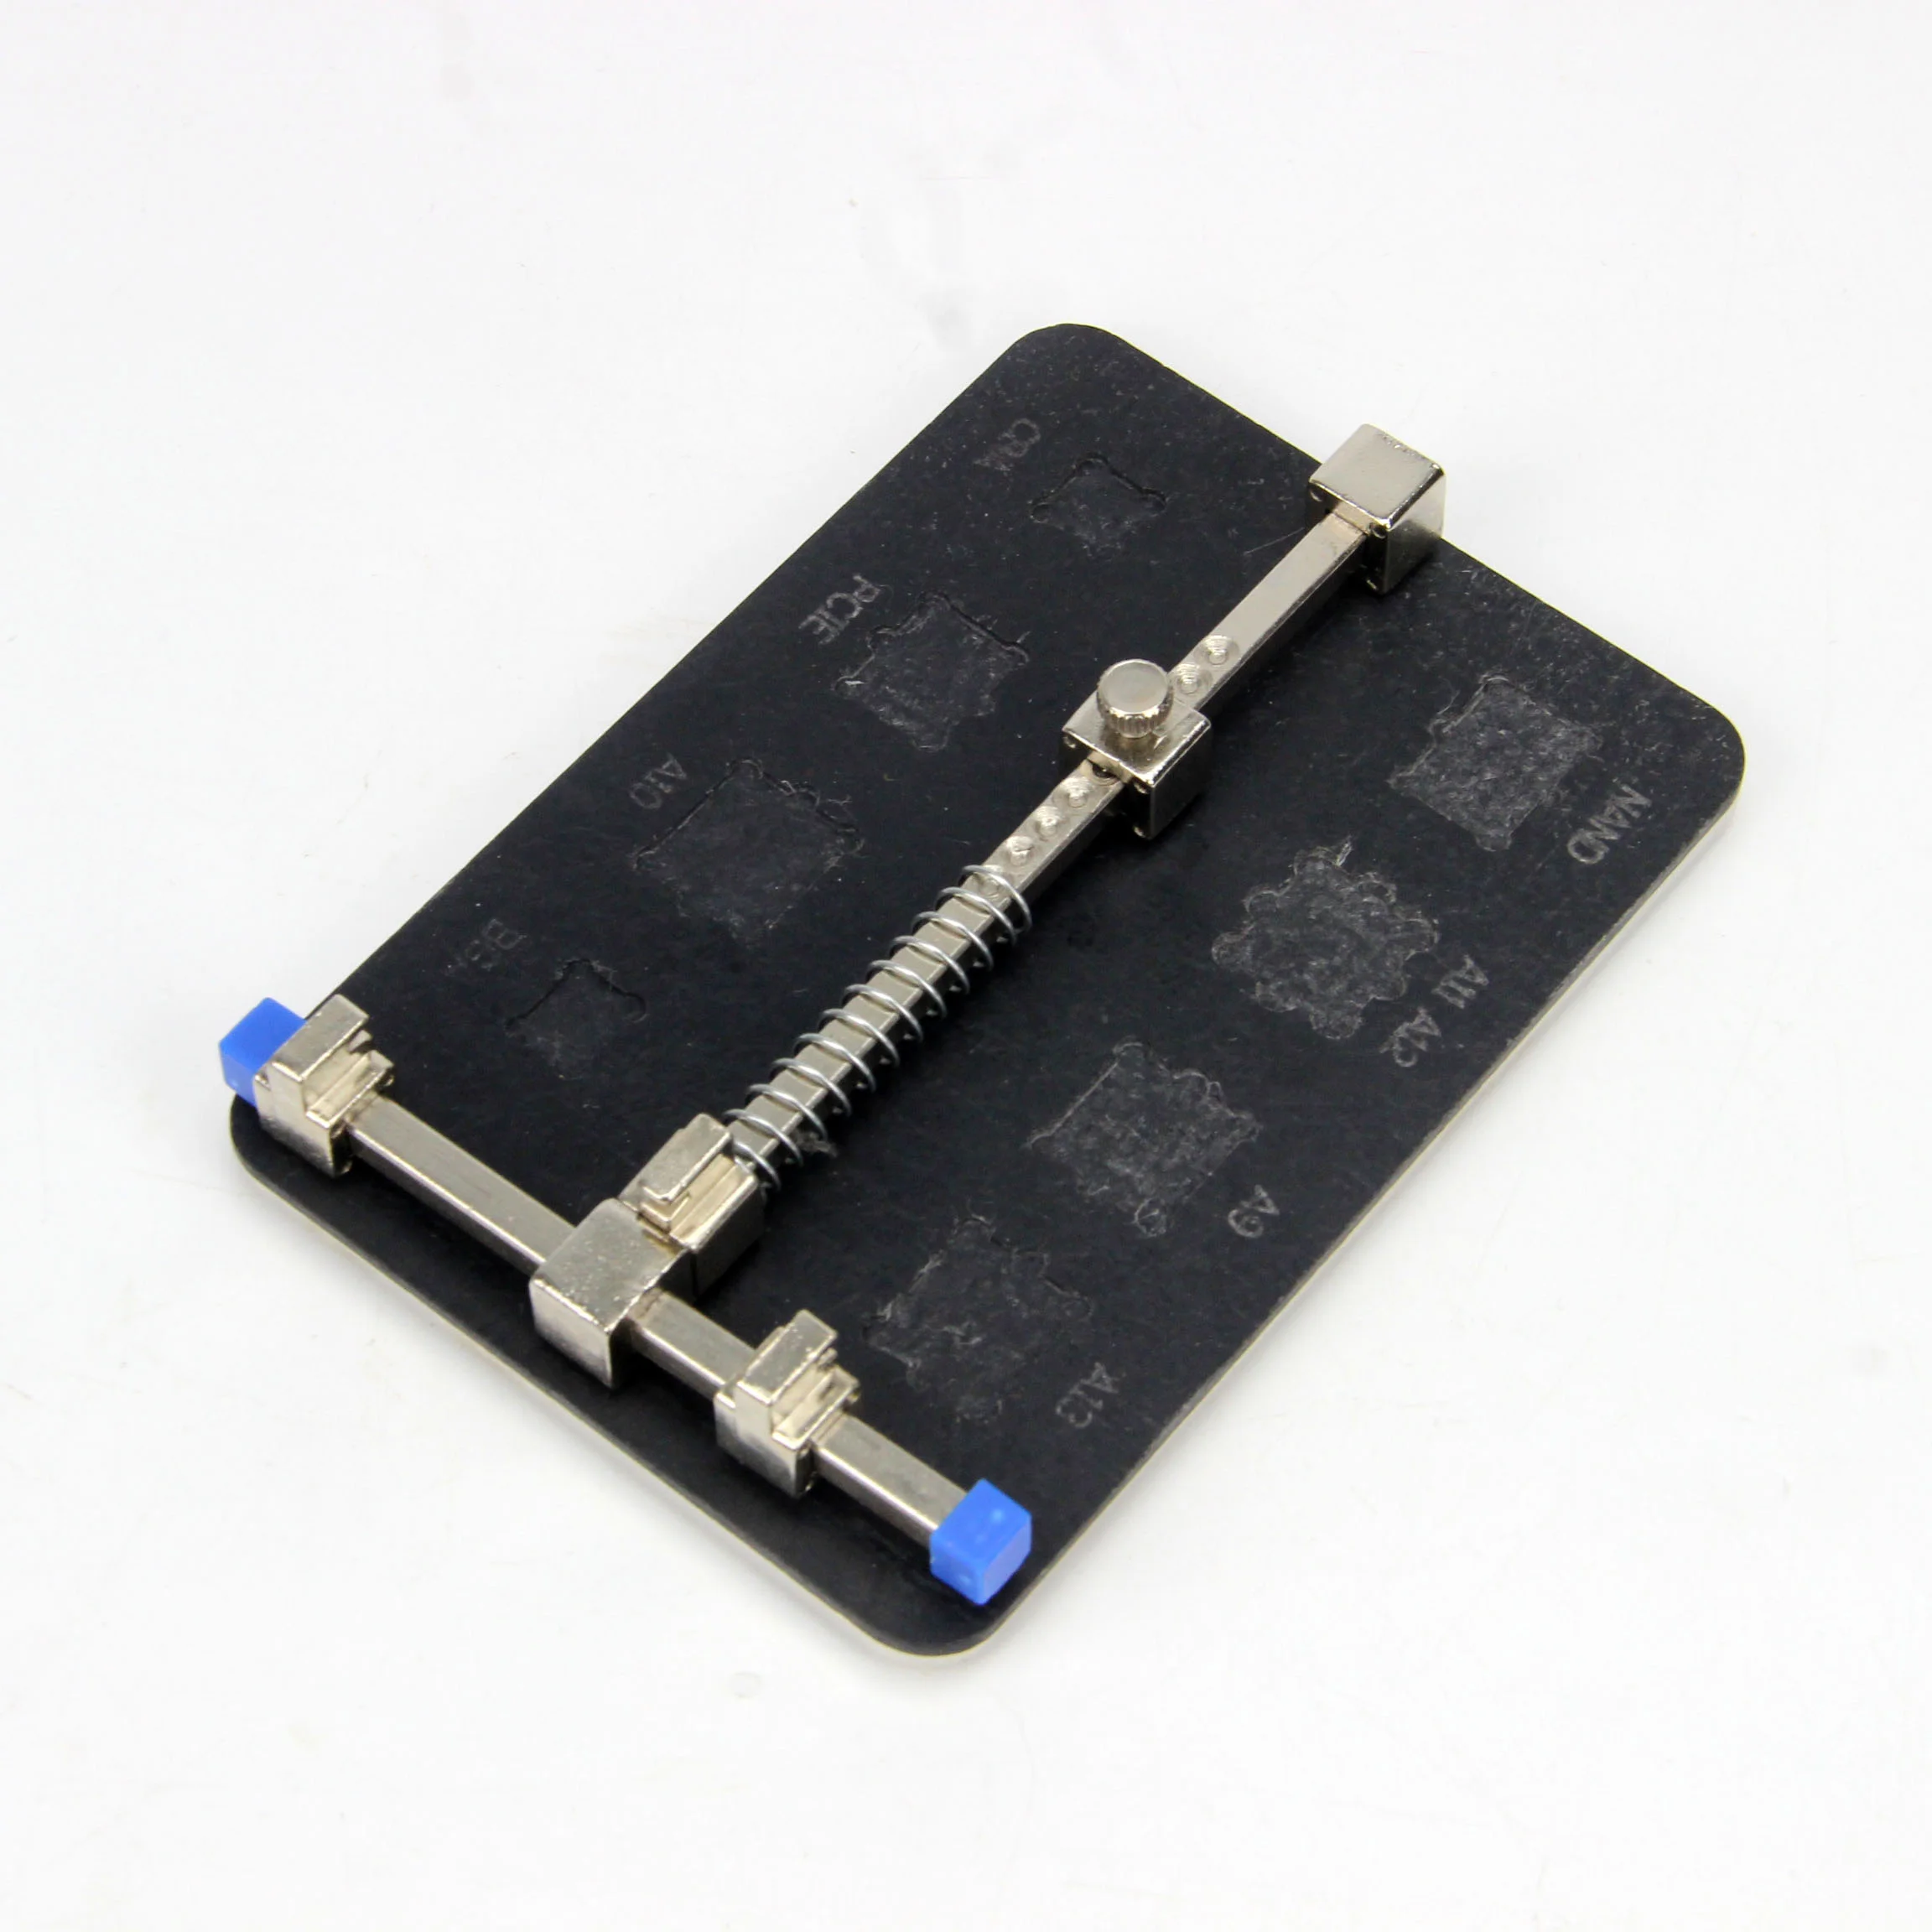 PCB Holder Jig For Cellphone Circuit Board Repair Soldering Clamp Fixture Stand 